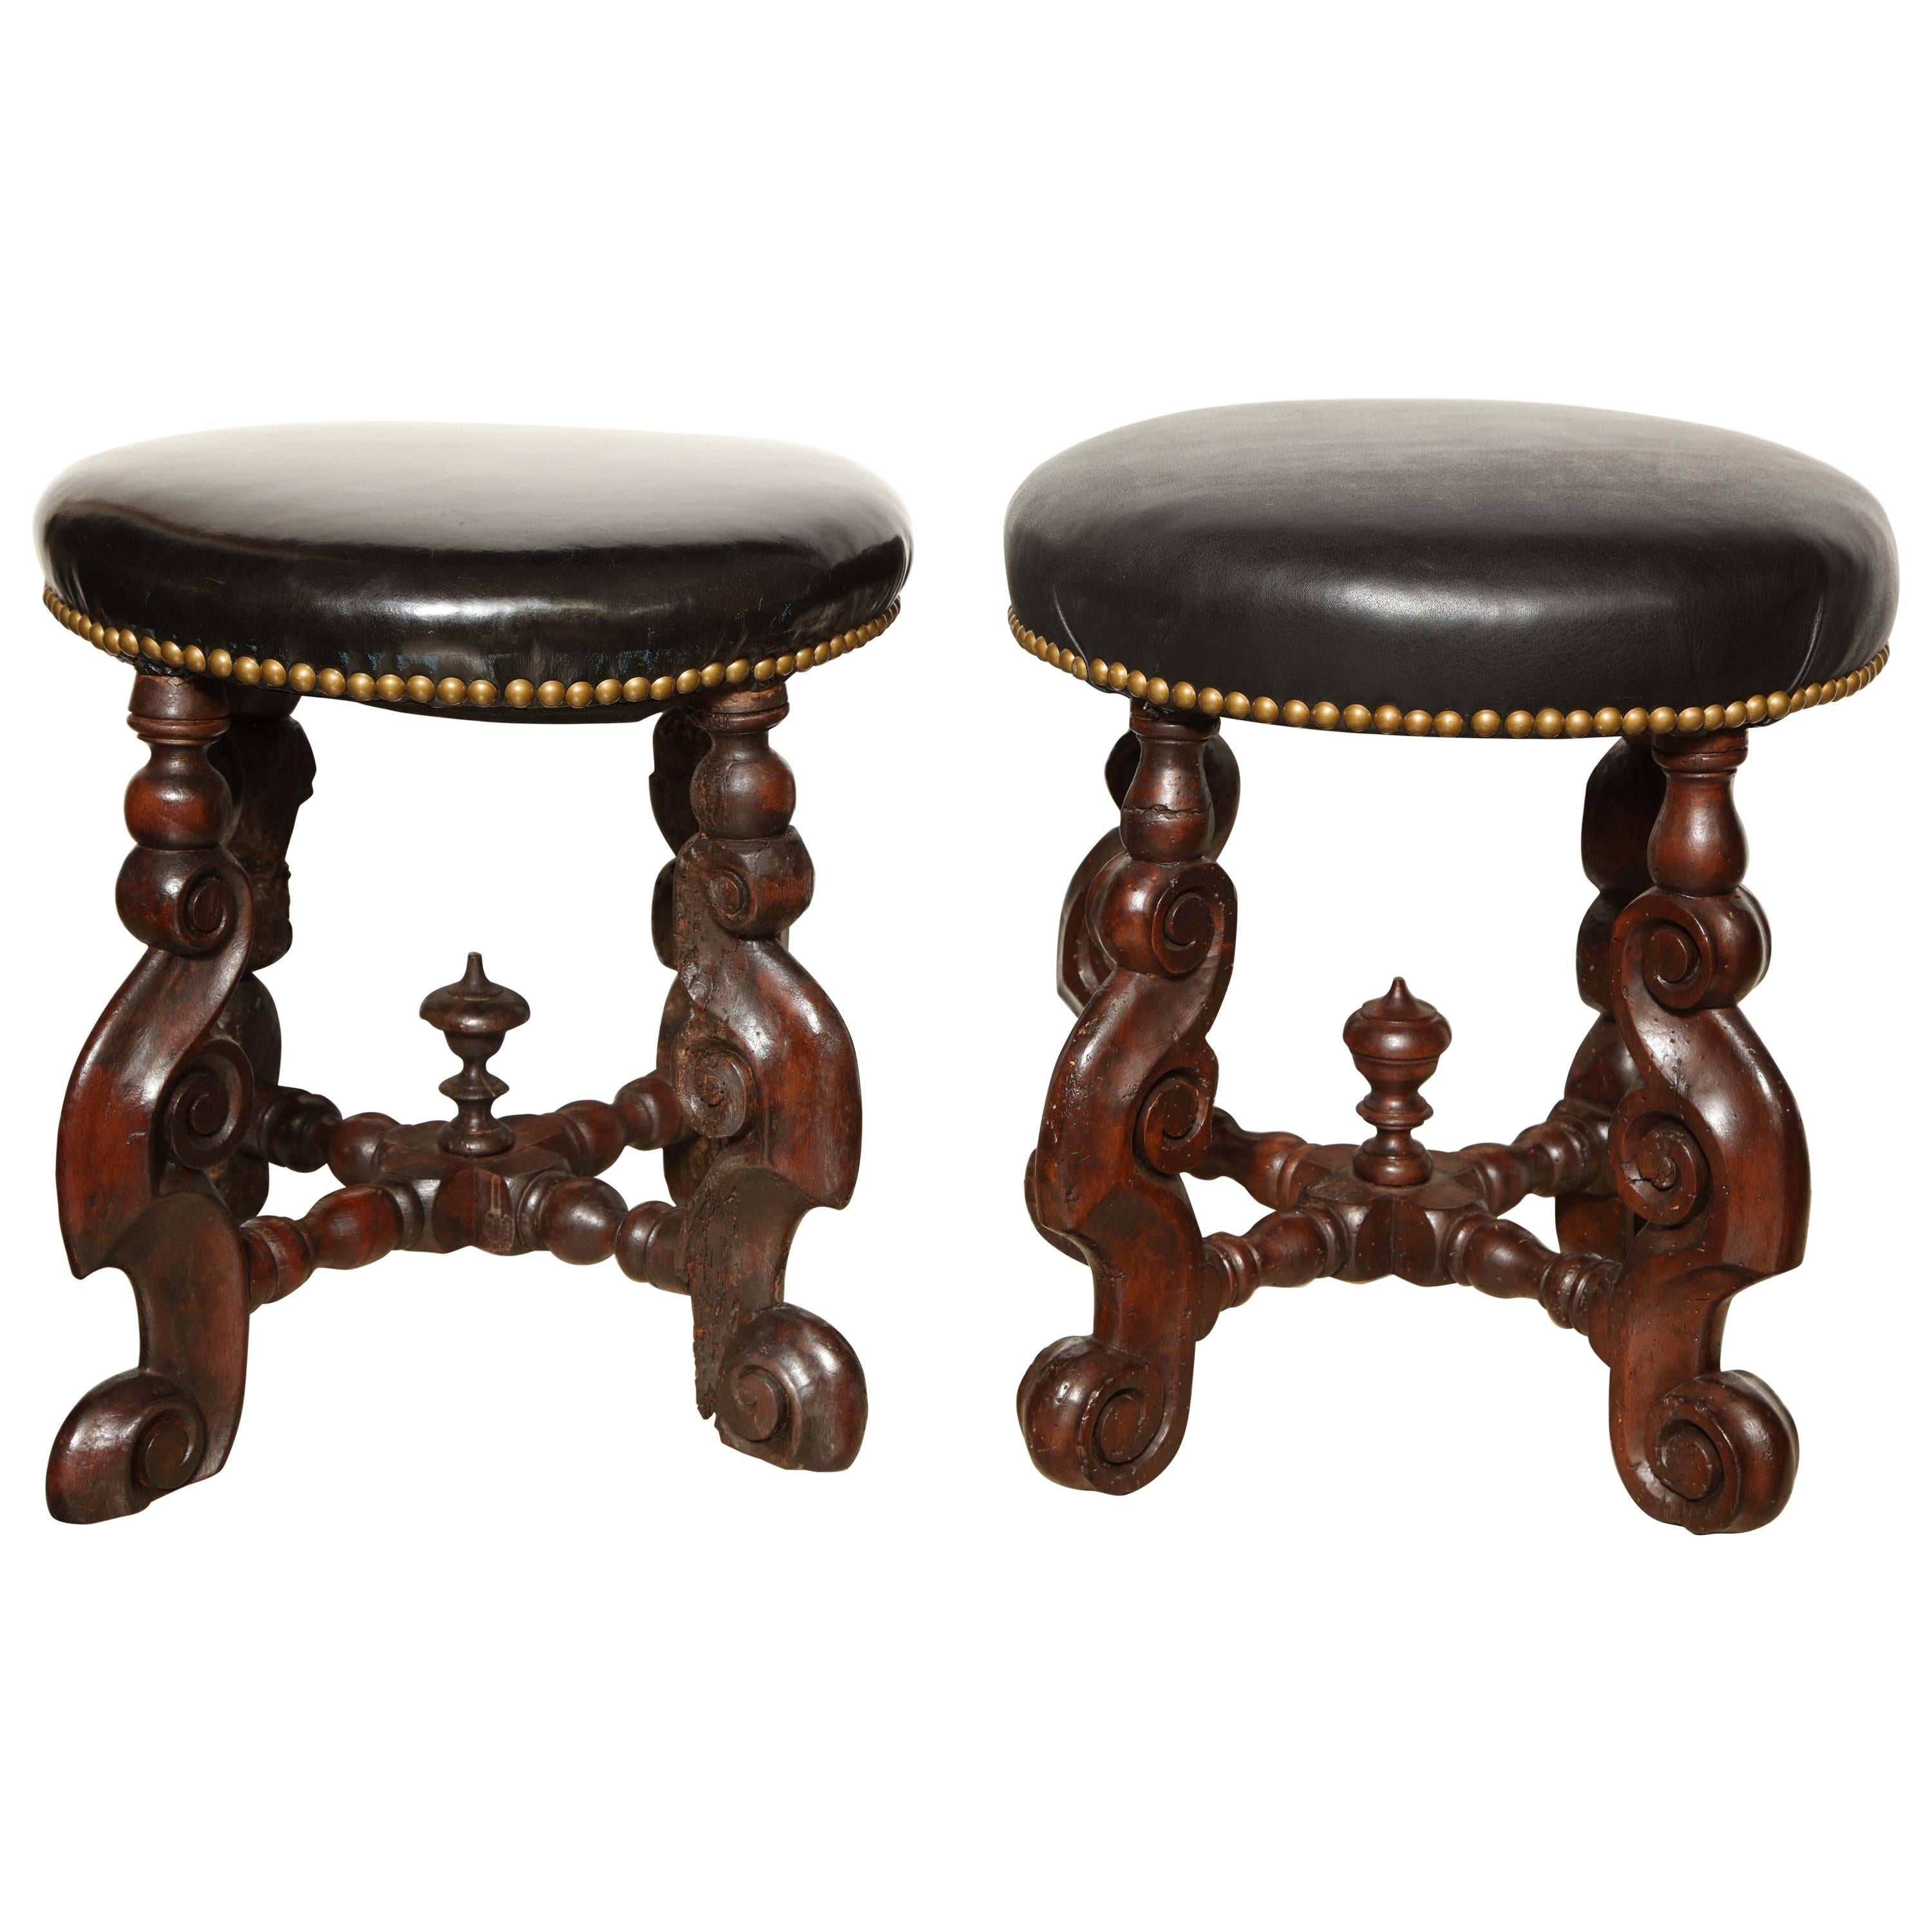 Pair of Early English Stools For Sale